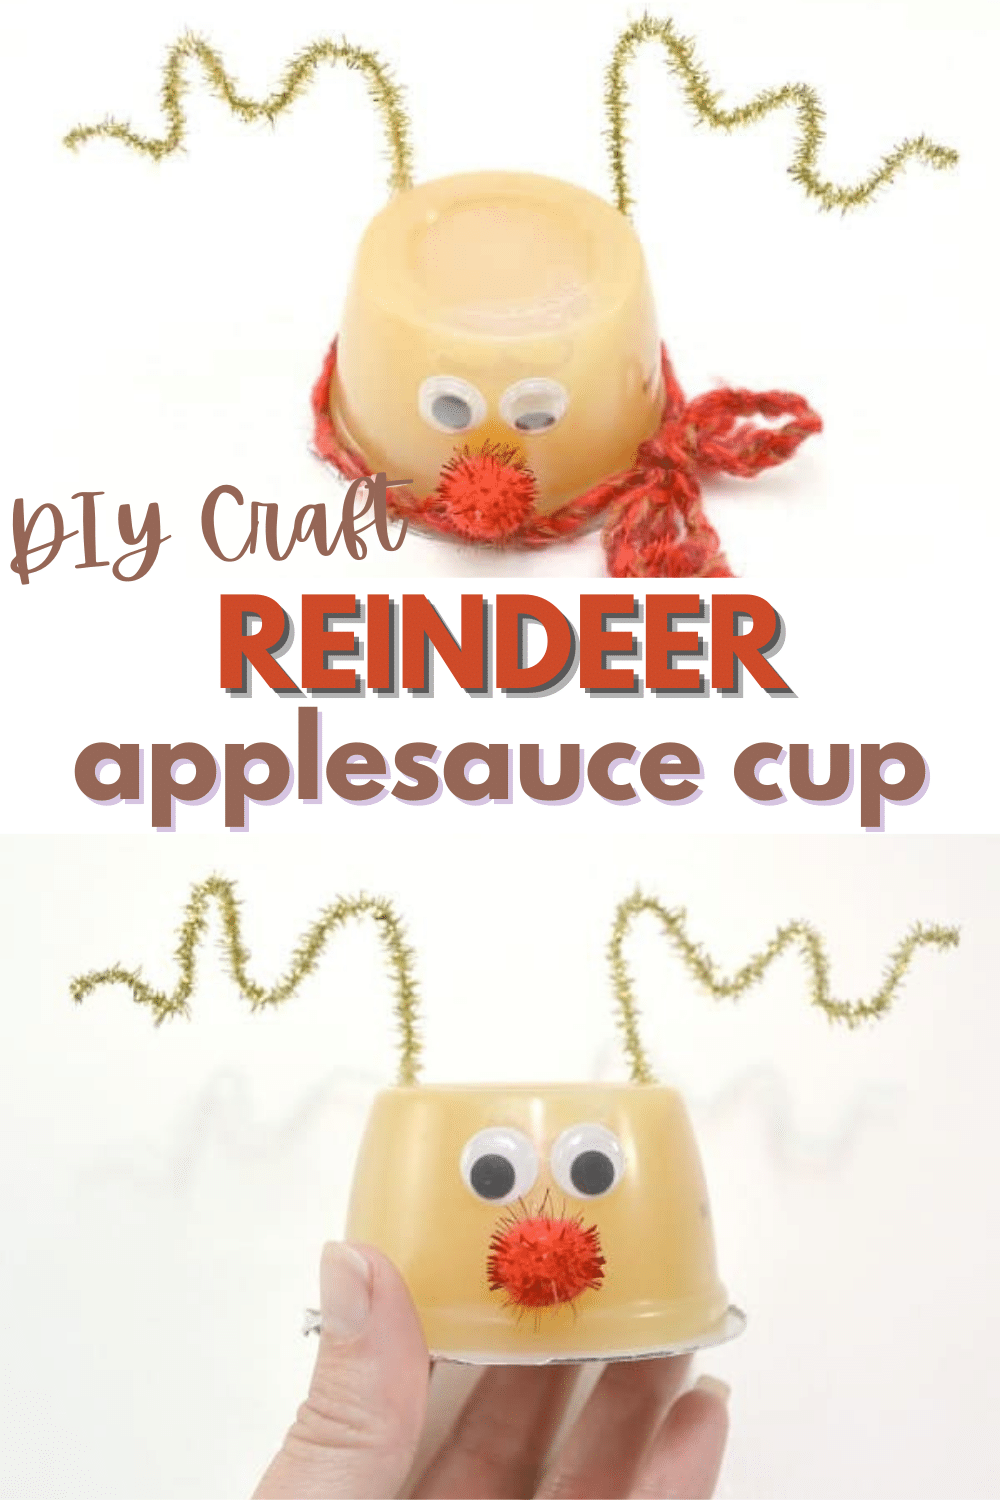 This reindeer applesauce is so cute! What an easy way to turn an ordinary snack into a fun holiday treat! #funfood #Christmas #reindeer #applesauce via @wondermomwannab